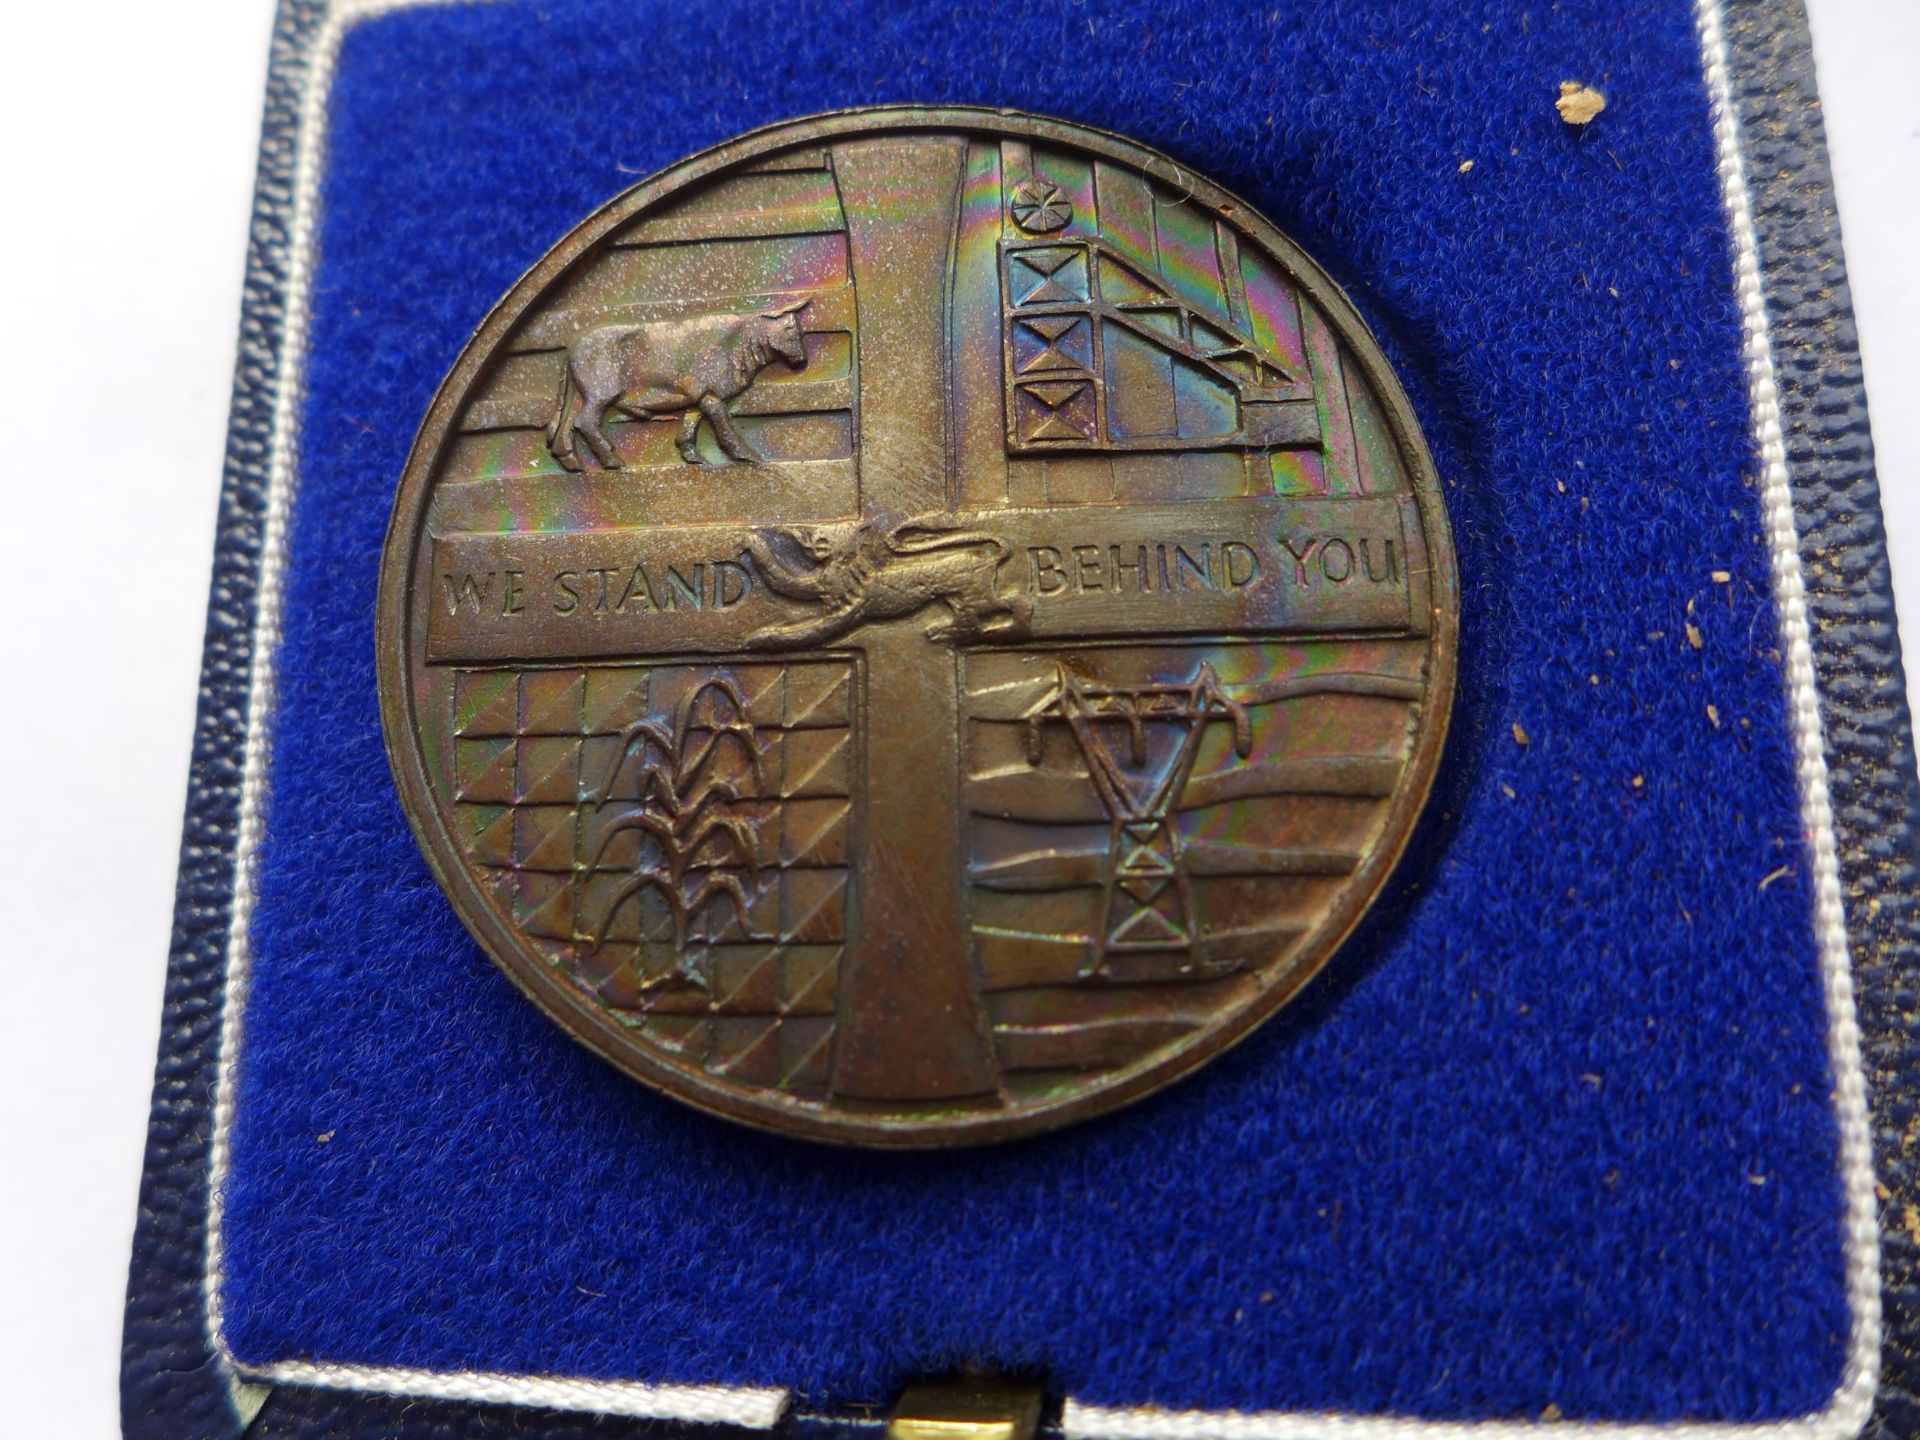 A CASED BRONZE RHODESIAN INDEPENDANCE MEDAL DATED NOVEMBER 11TH 1965, 37MM - Image 3 of 4